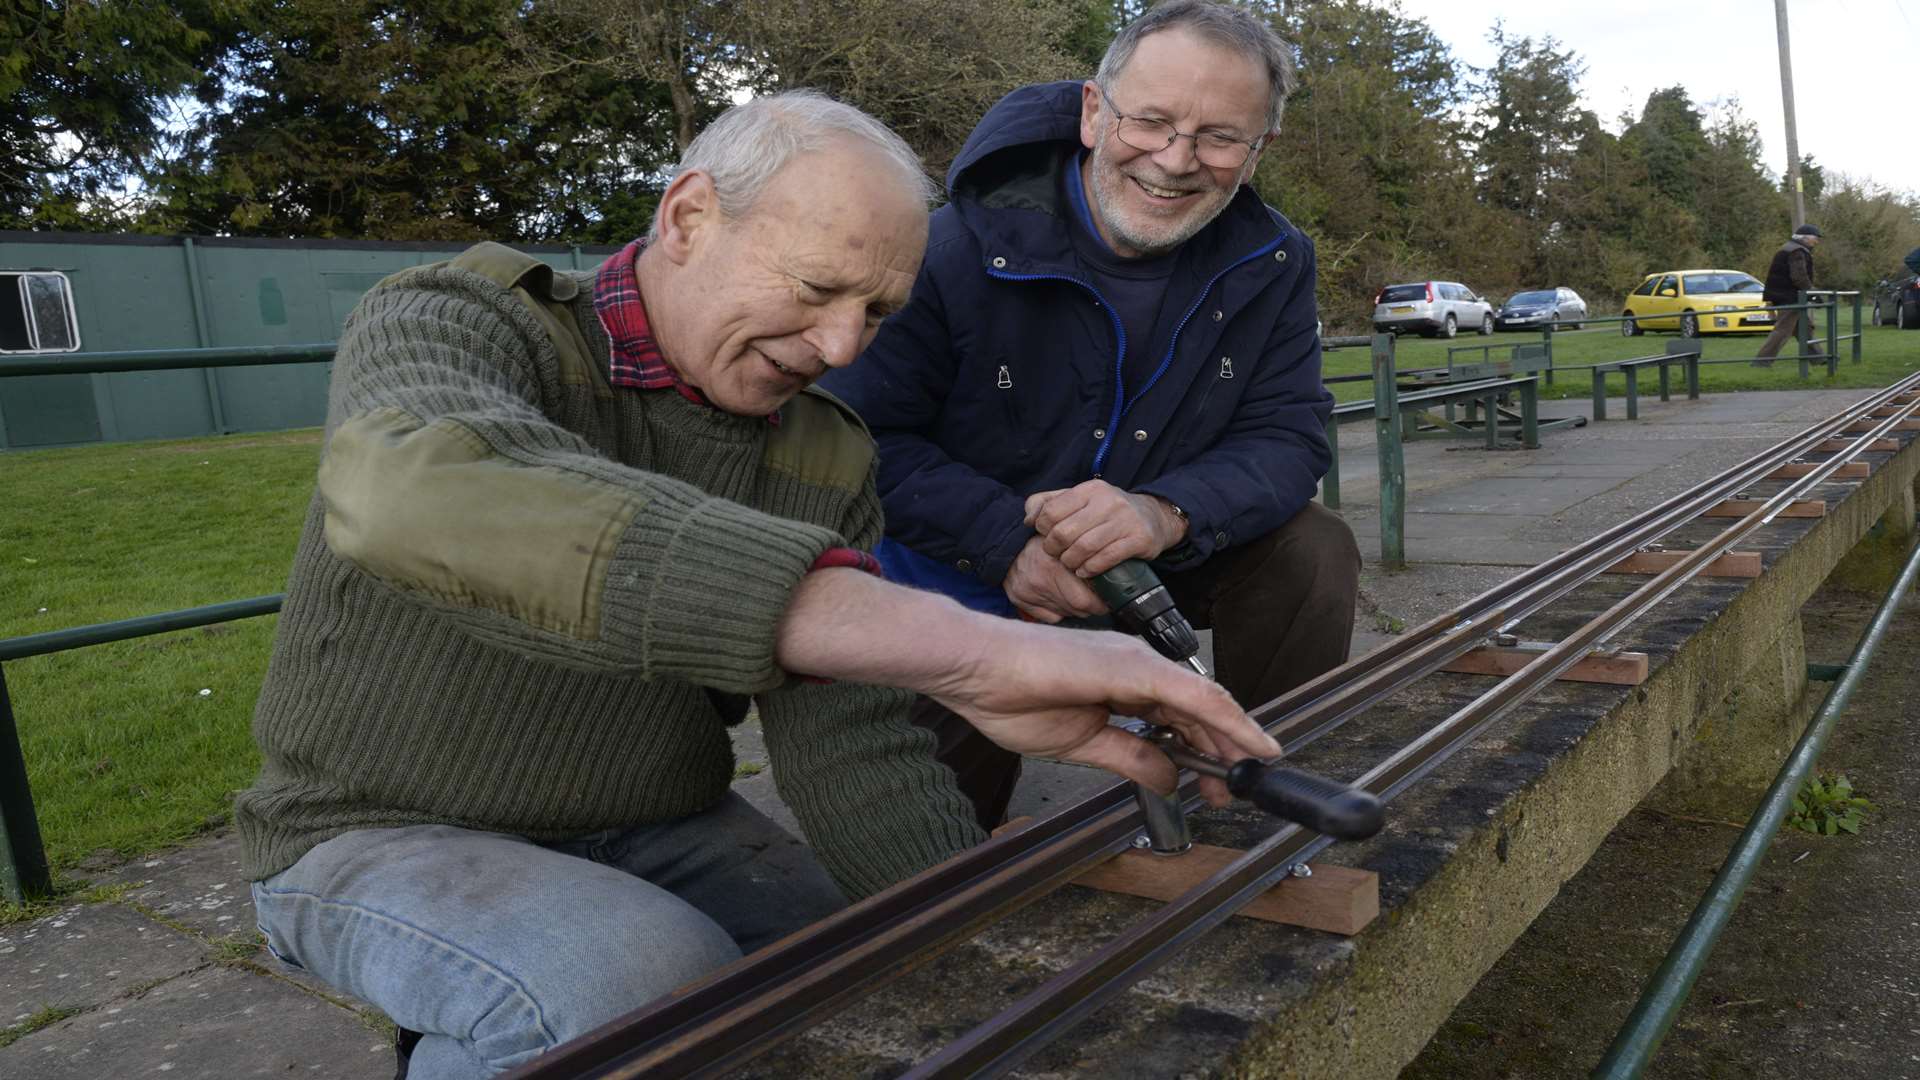 Peter Skelton and Clive Mowatt at work on re-instating the miniature railway track.